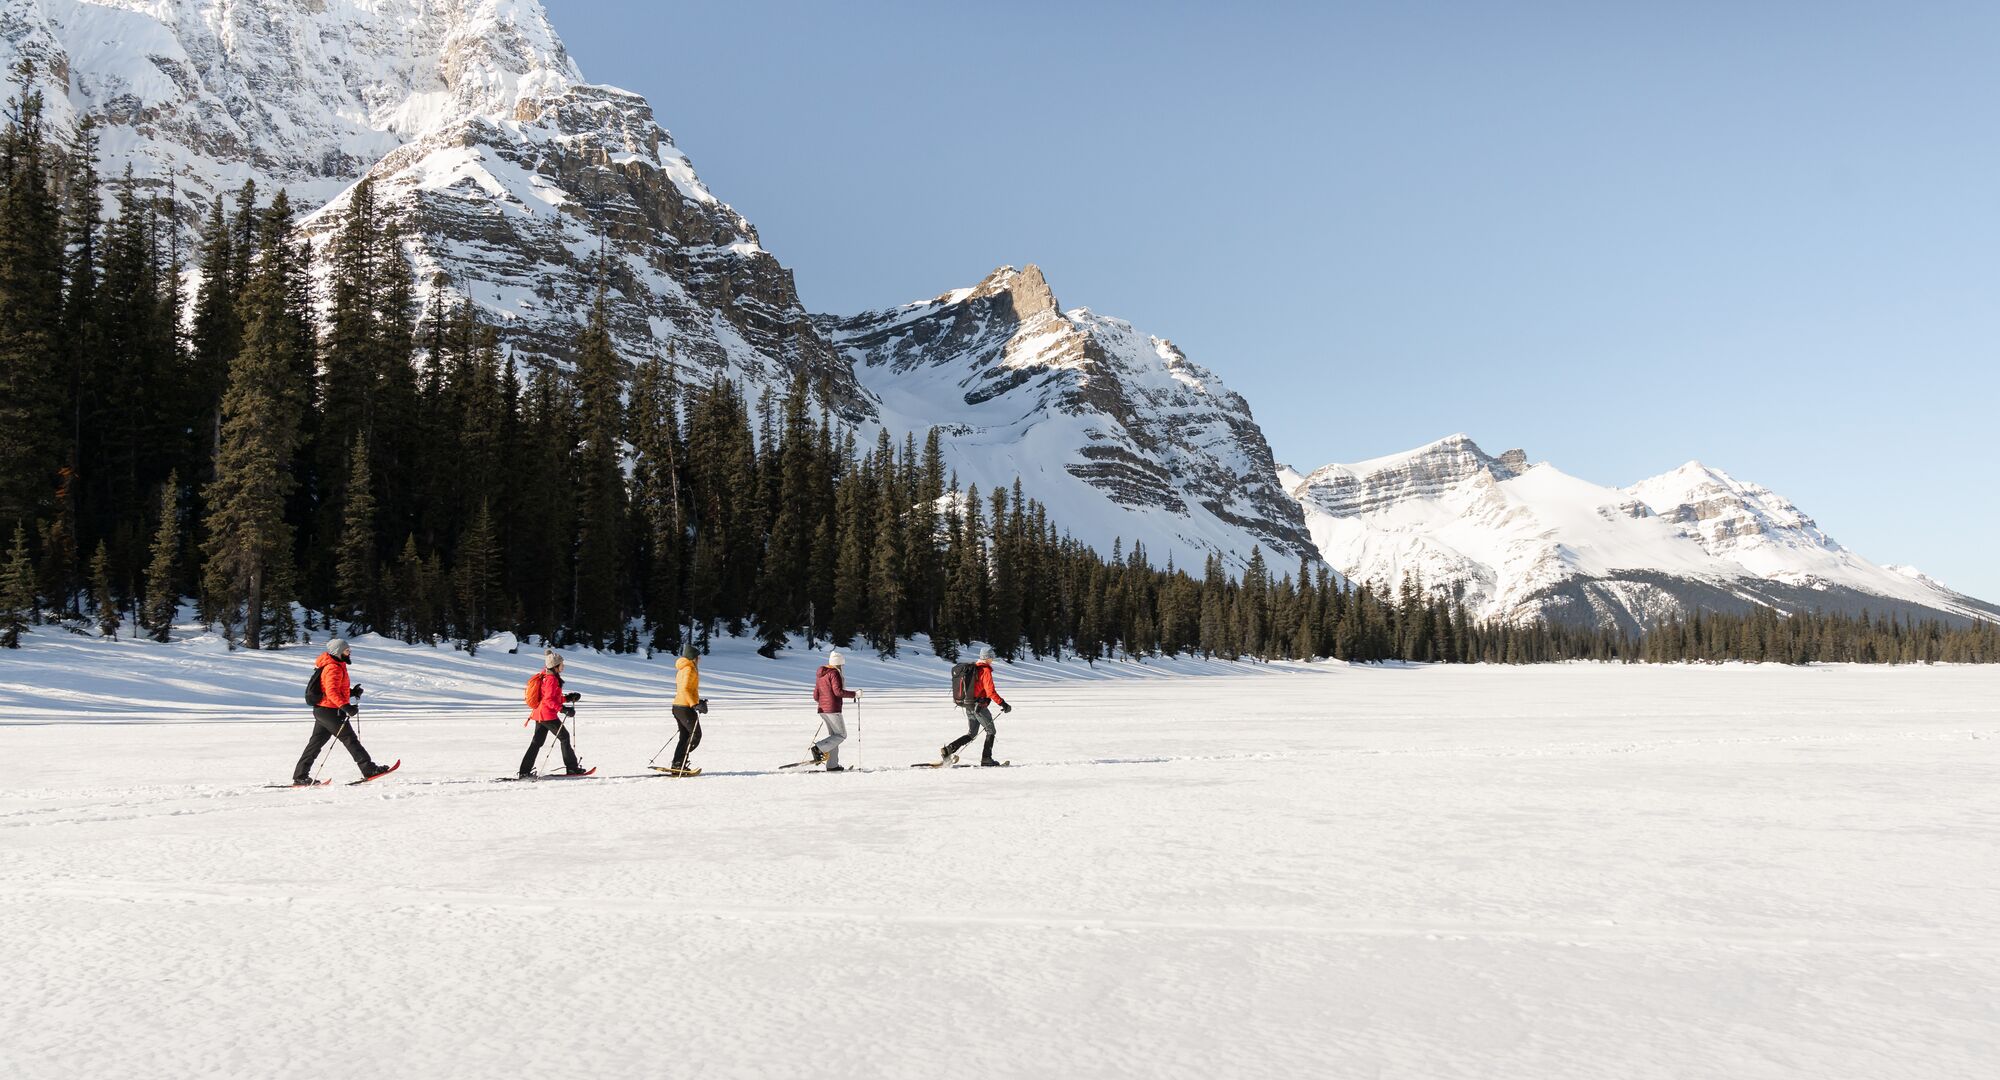 <Winter Rockies Classic 3-Day Tour>Explore the enchanting town of Banff, visit the iconic Fairmont Chateau Lake Louise, experience complimentary snowshoeing, Icewalk at Johnston Canyon, Soak in the Banff Upper Hot Springs, enjoy afternoon tea at Chateau Lake Louise, Complimentary Calgary Airport Pick Up